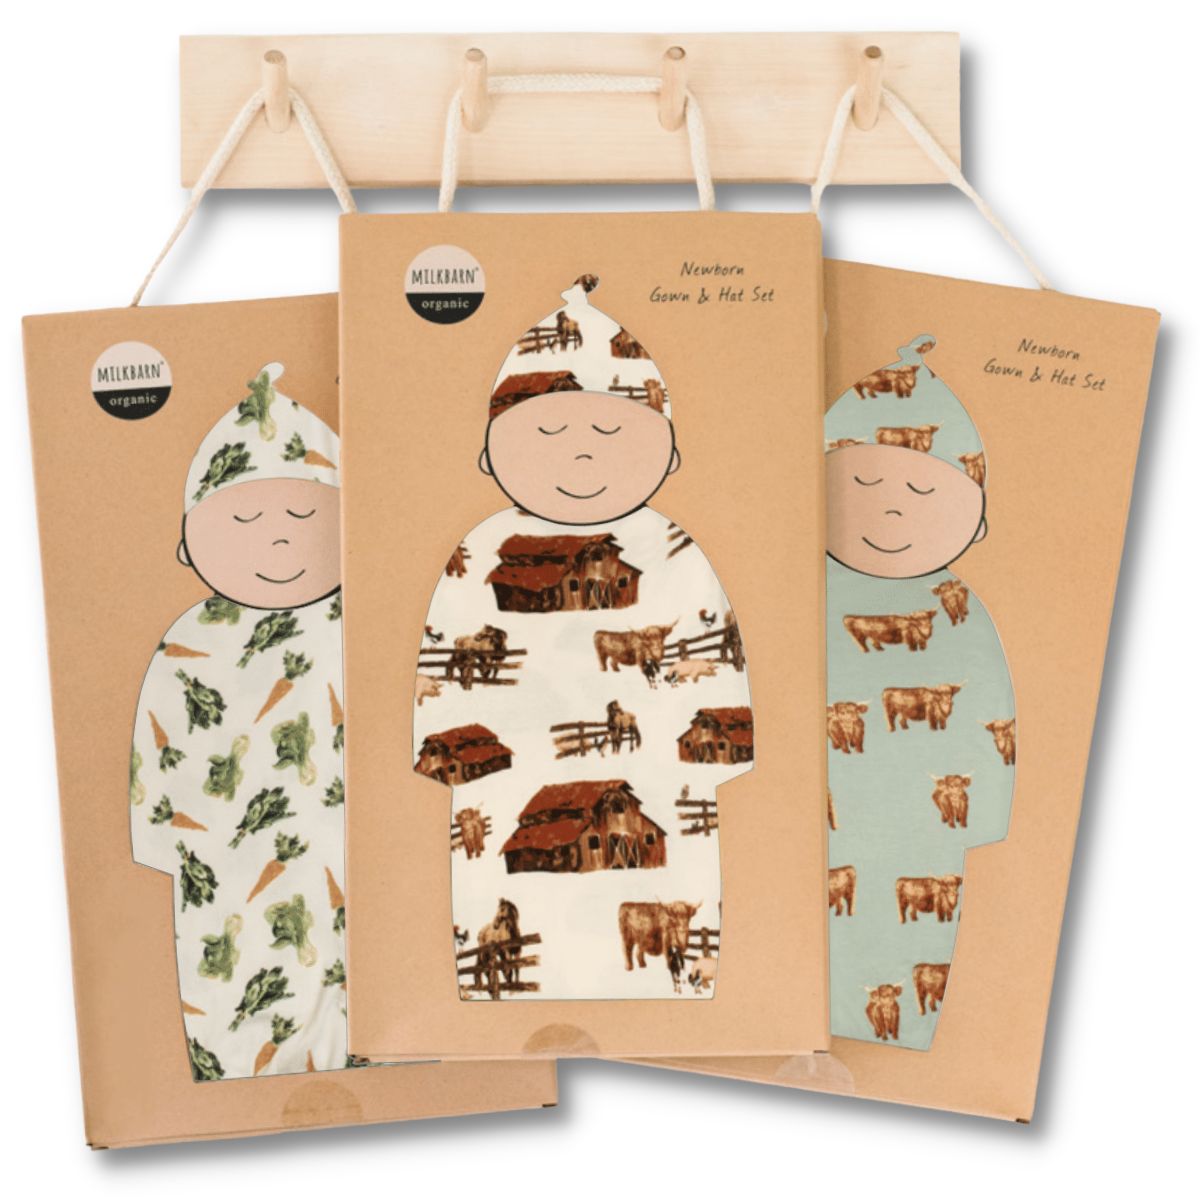 Newborn Organic and Bamboo Gown and Hat Set Packaging Display in the Homestead print, the Fresh Veggies print, and the Highland Cow by Milkbarn